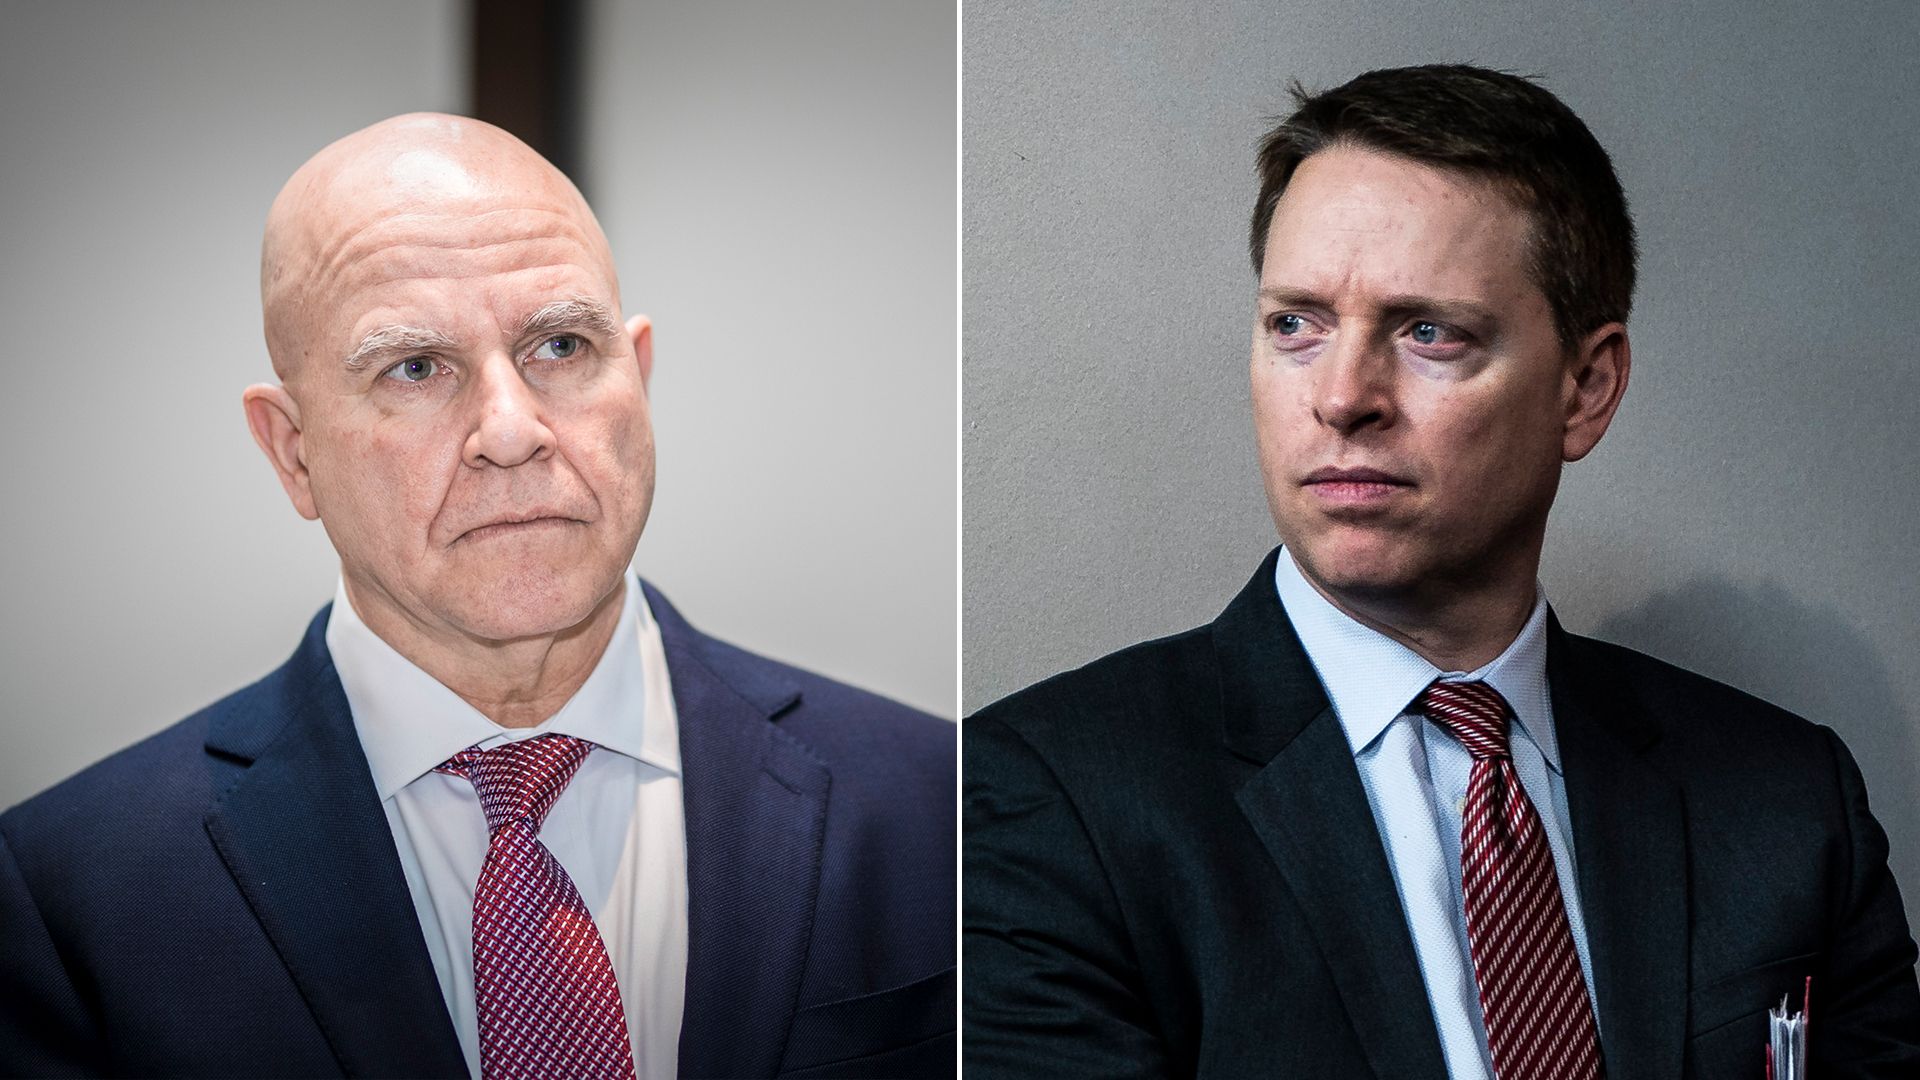 Former Trump officials H.R. McMaster and Matthew Pottinger are seen in a side-by-side photo array.